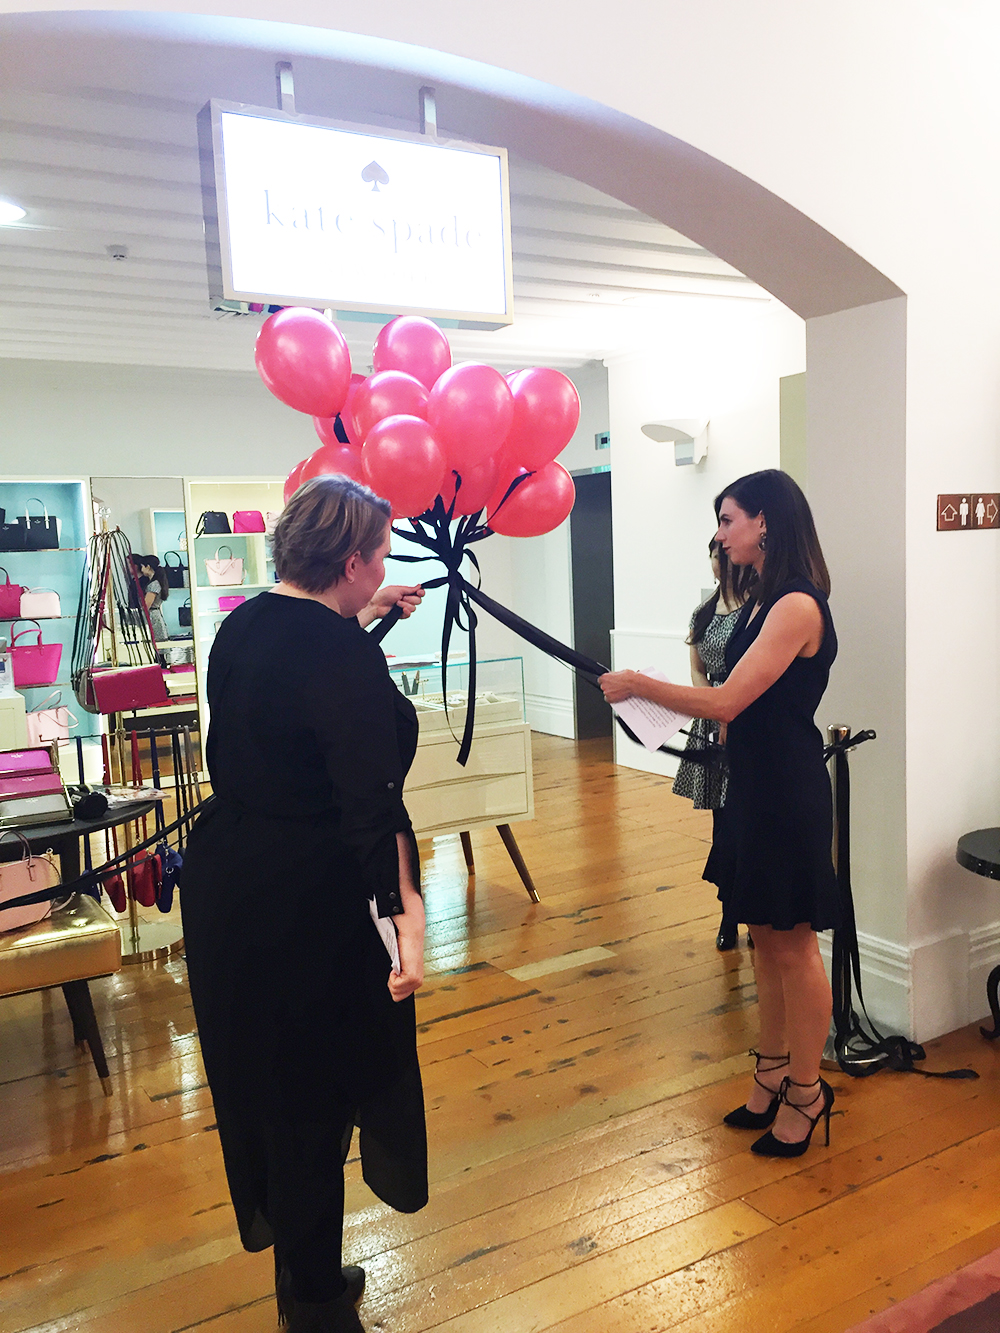 Fashion Quarterly editor Sally-Ann Mullin and T Galleria by DFS General Manager Carly Robertson cut the ribbon to officially open the Kate Spade boutique